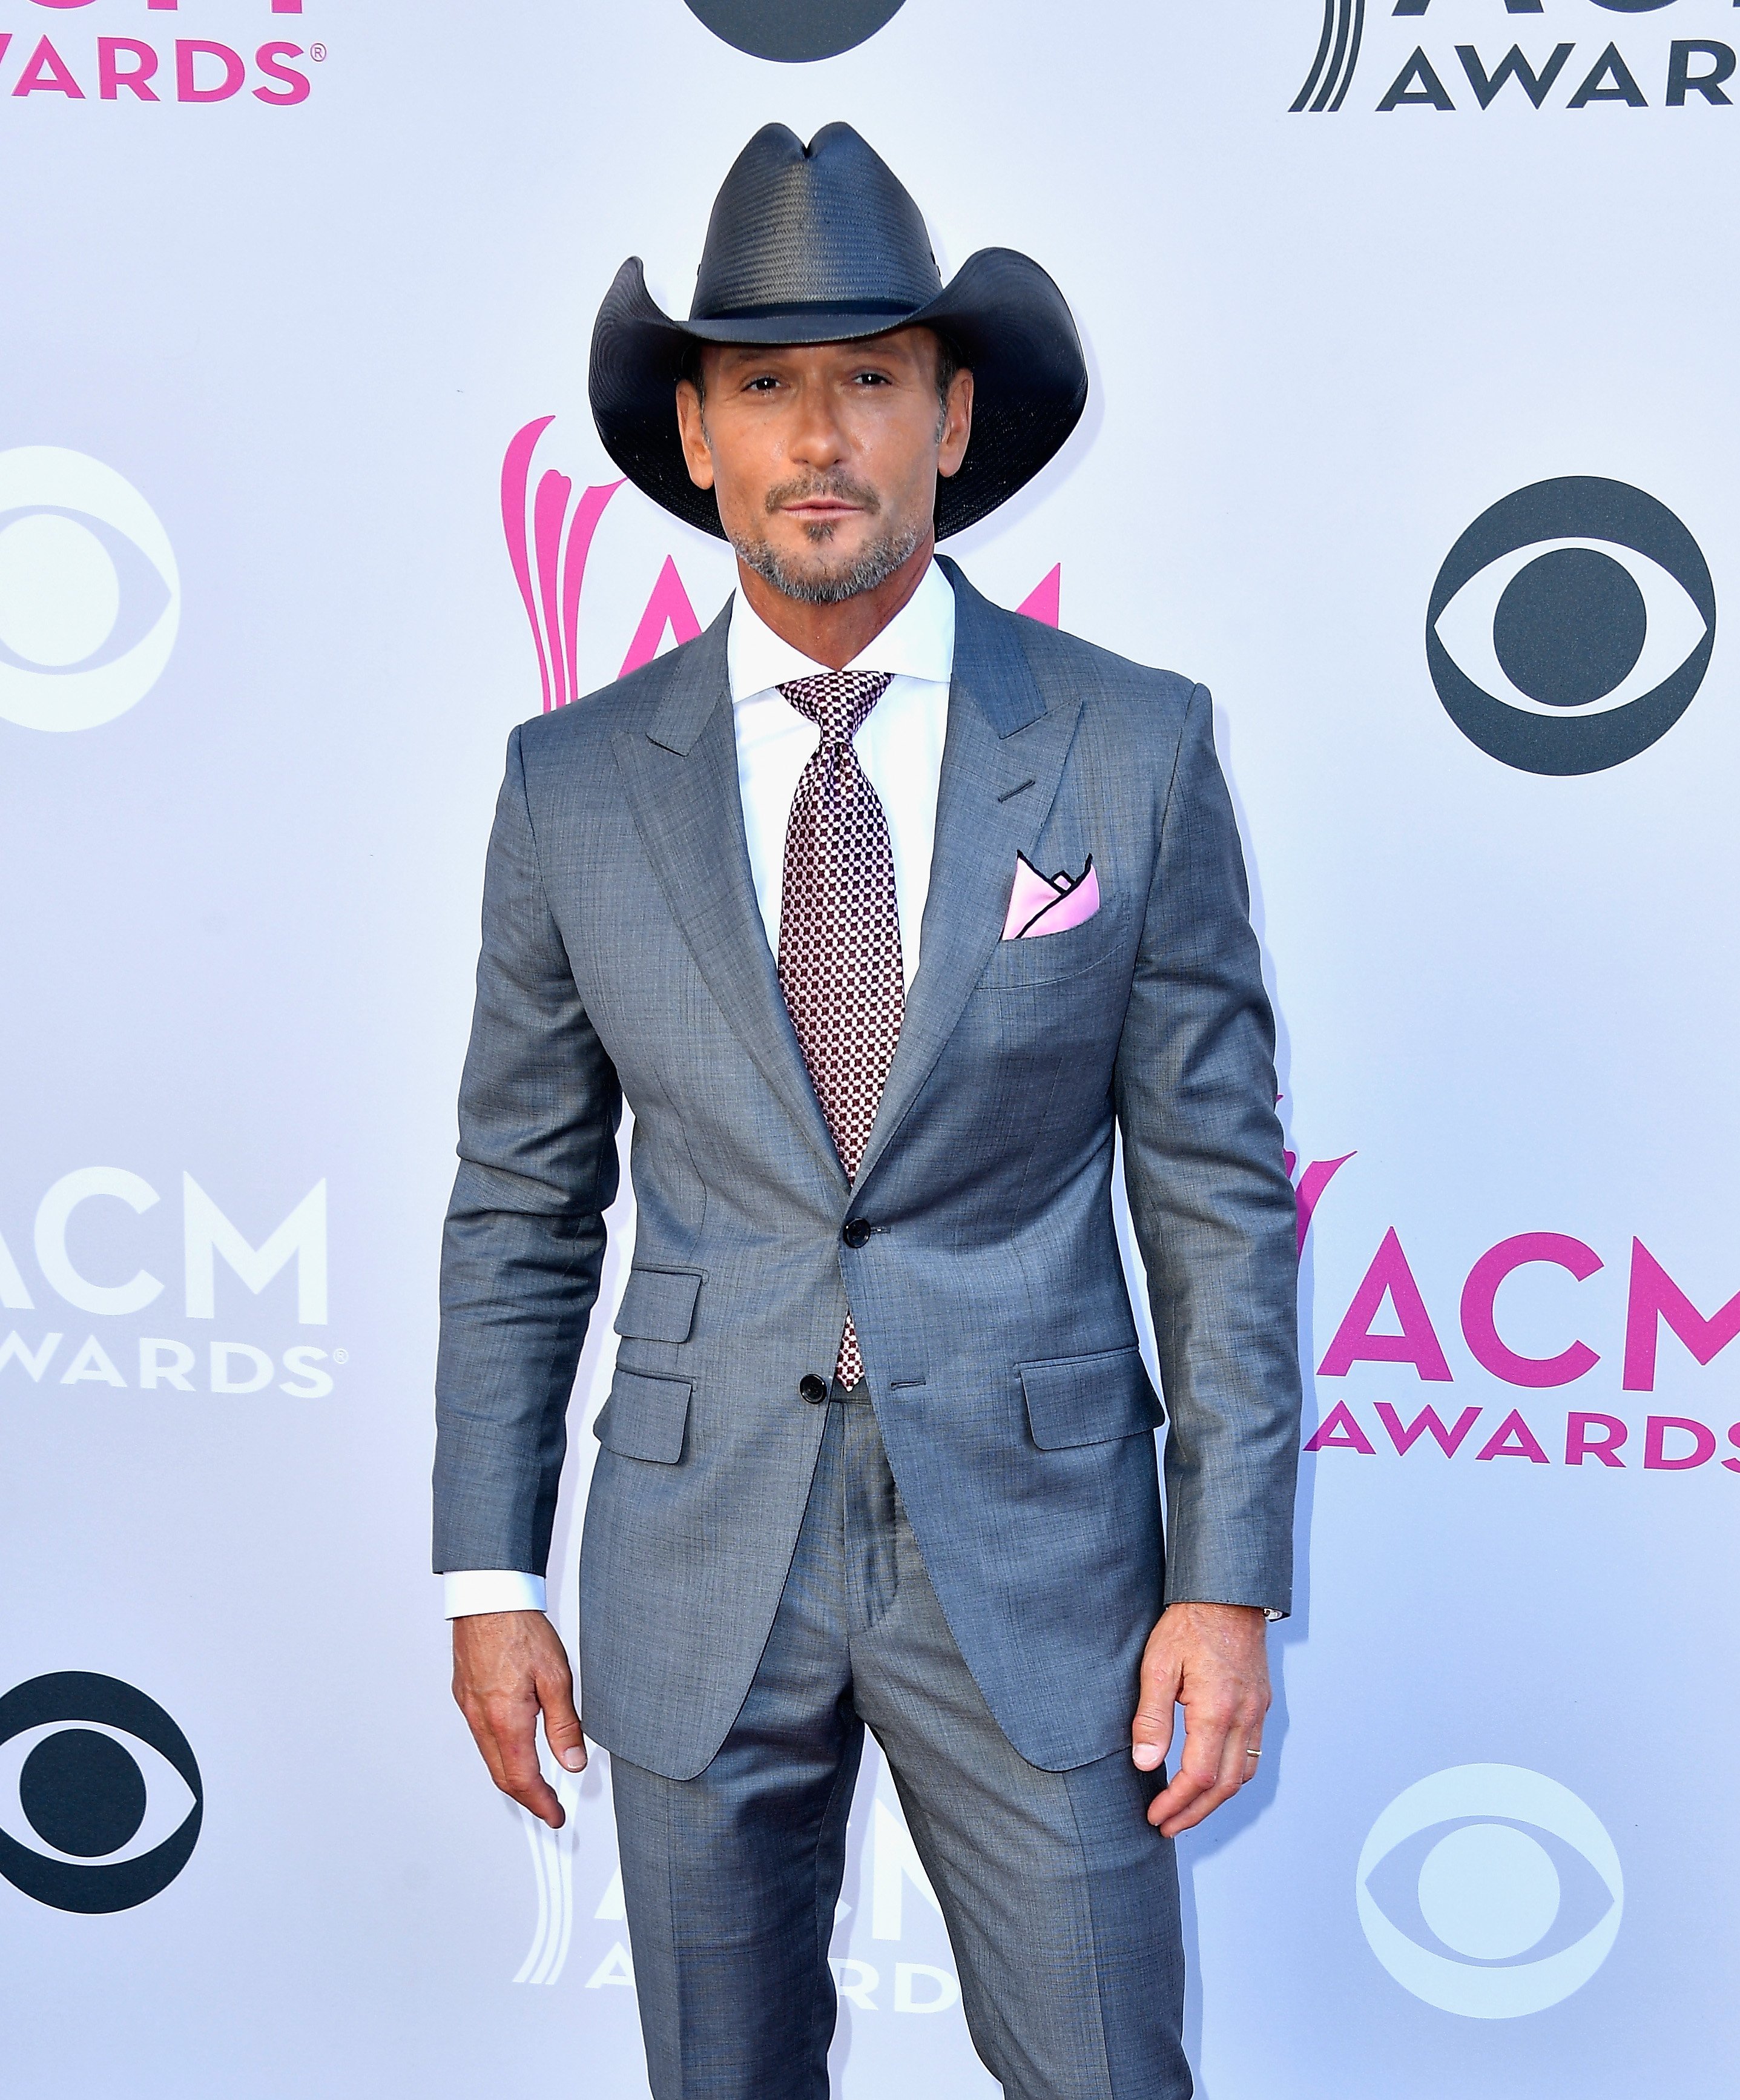 Tim McGraw attends the 52nd Academy Of Country Music Awards at Toshiba Plaza on April 2, 2017, in Las Vegas, Nevada. | Source: Getty Images.